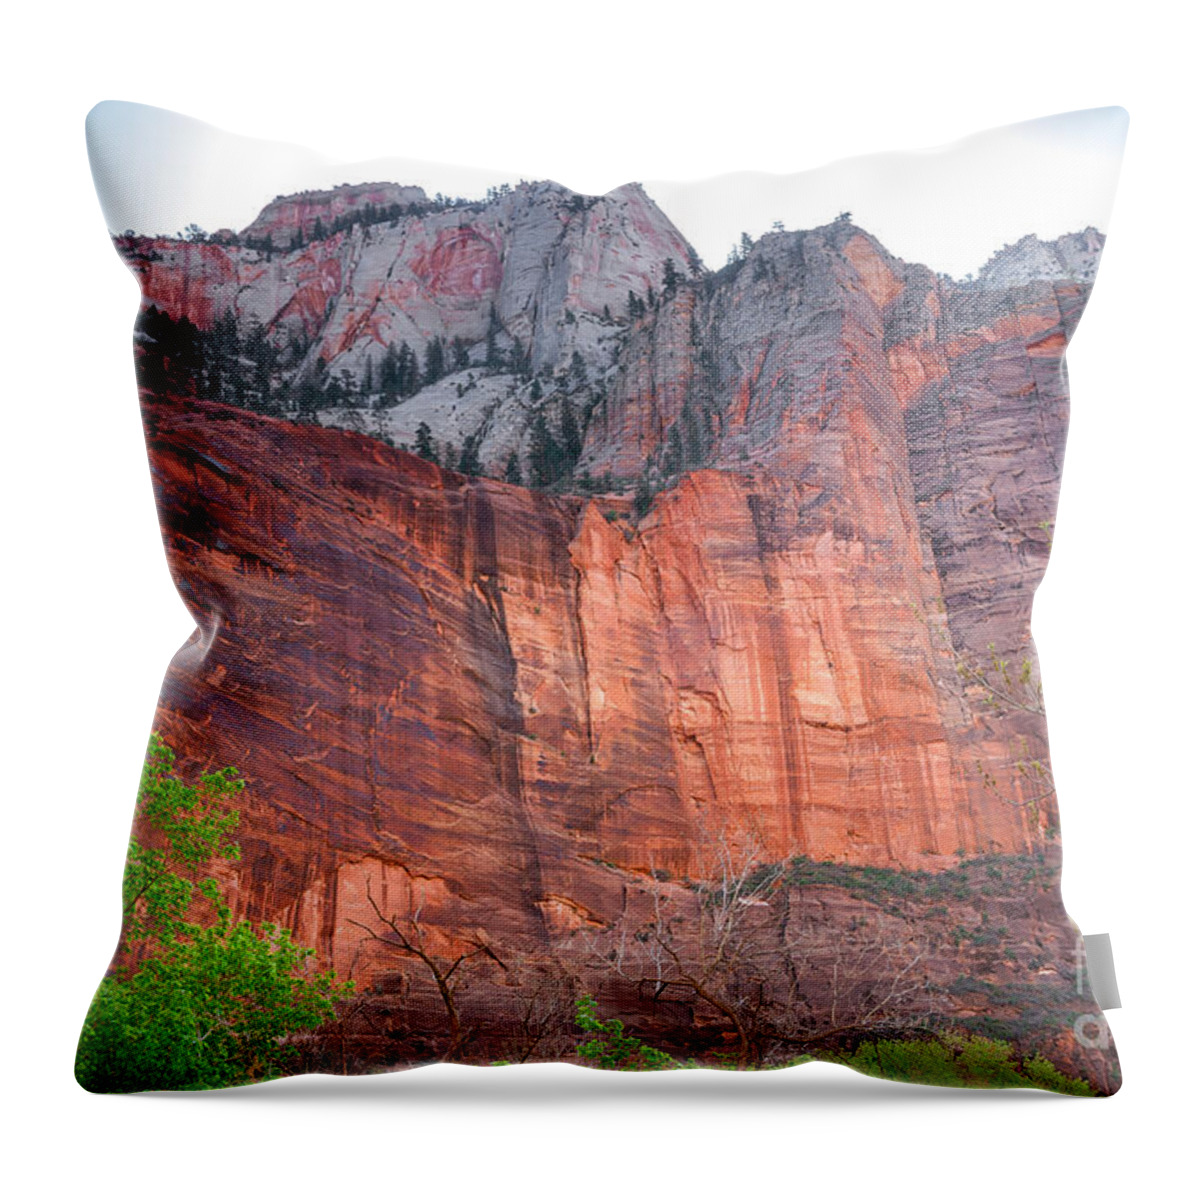 Zion National Parks Throw Pillow featuring the photograph Sandstone Wall in Zion by Robert Bales